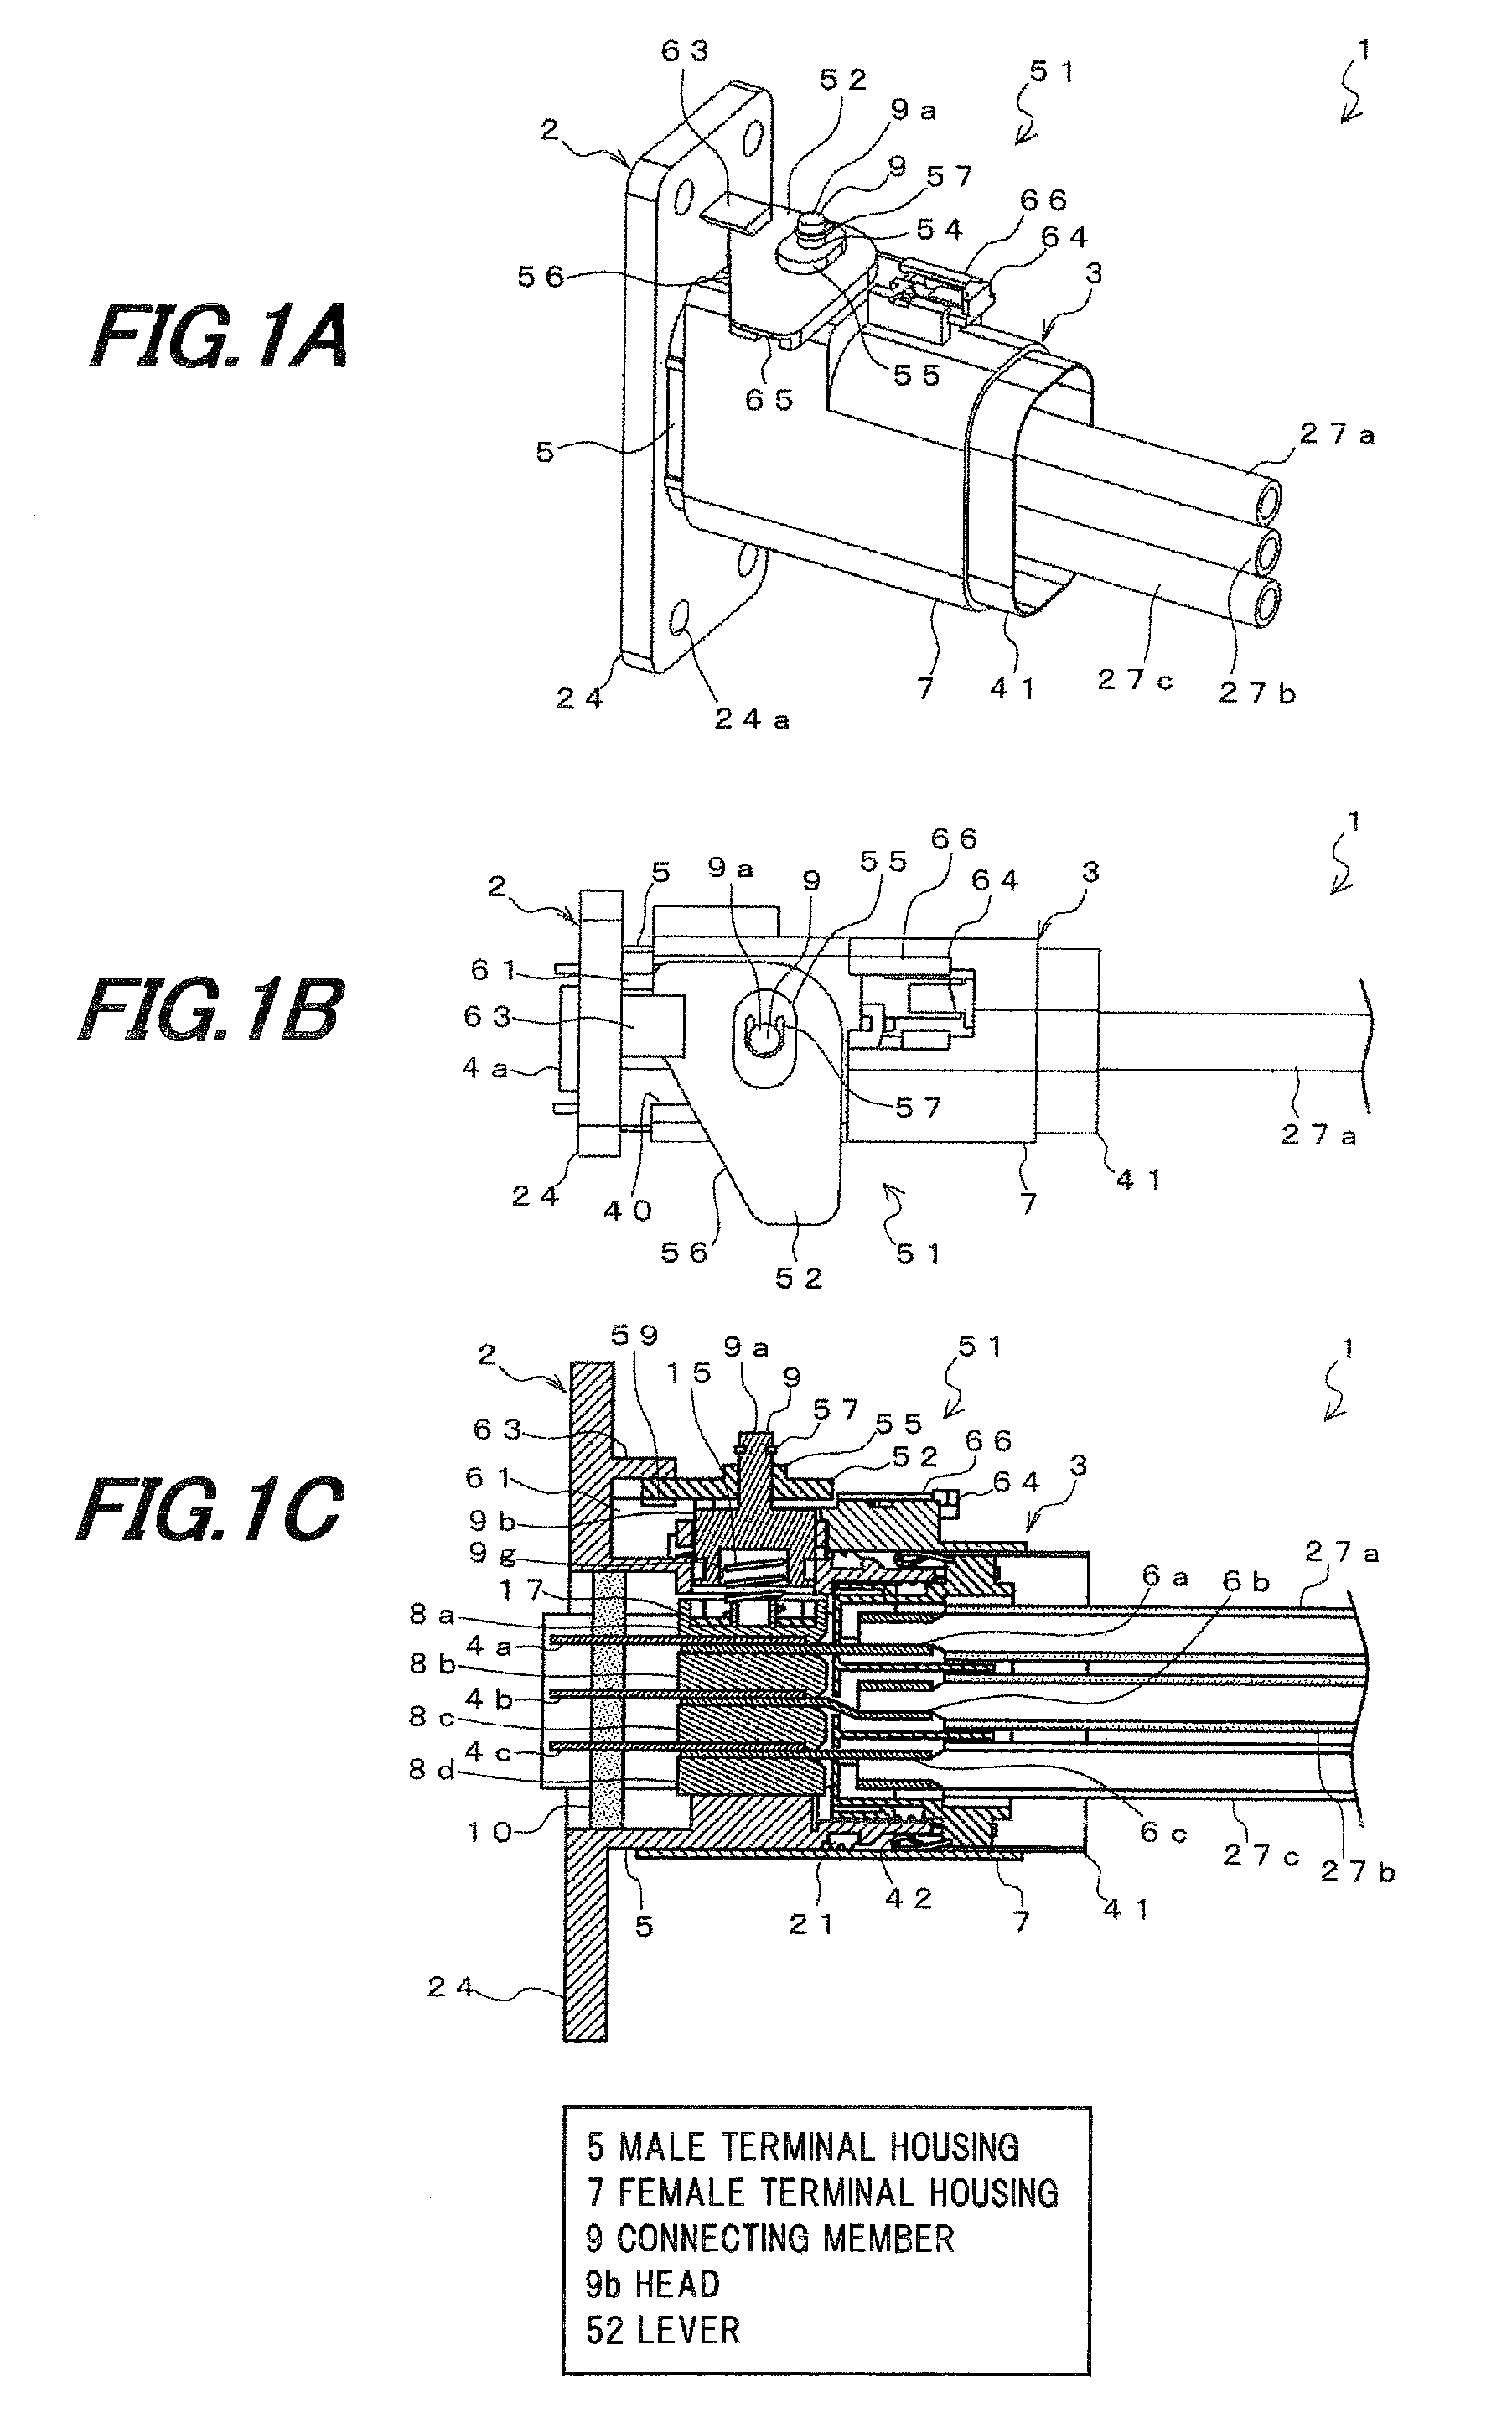 Connector for large power transmission